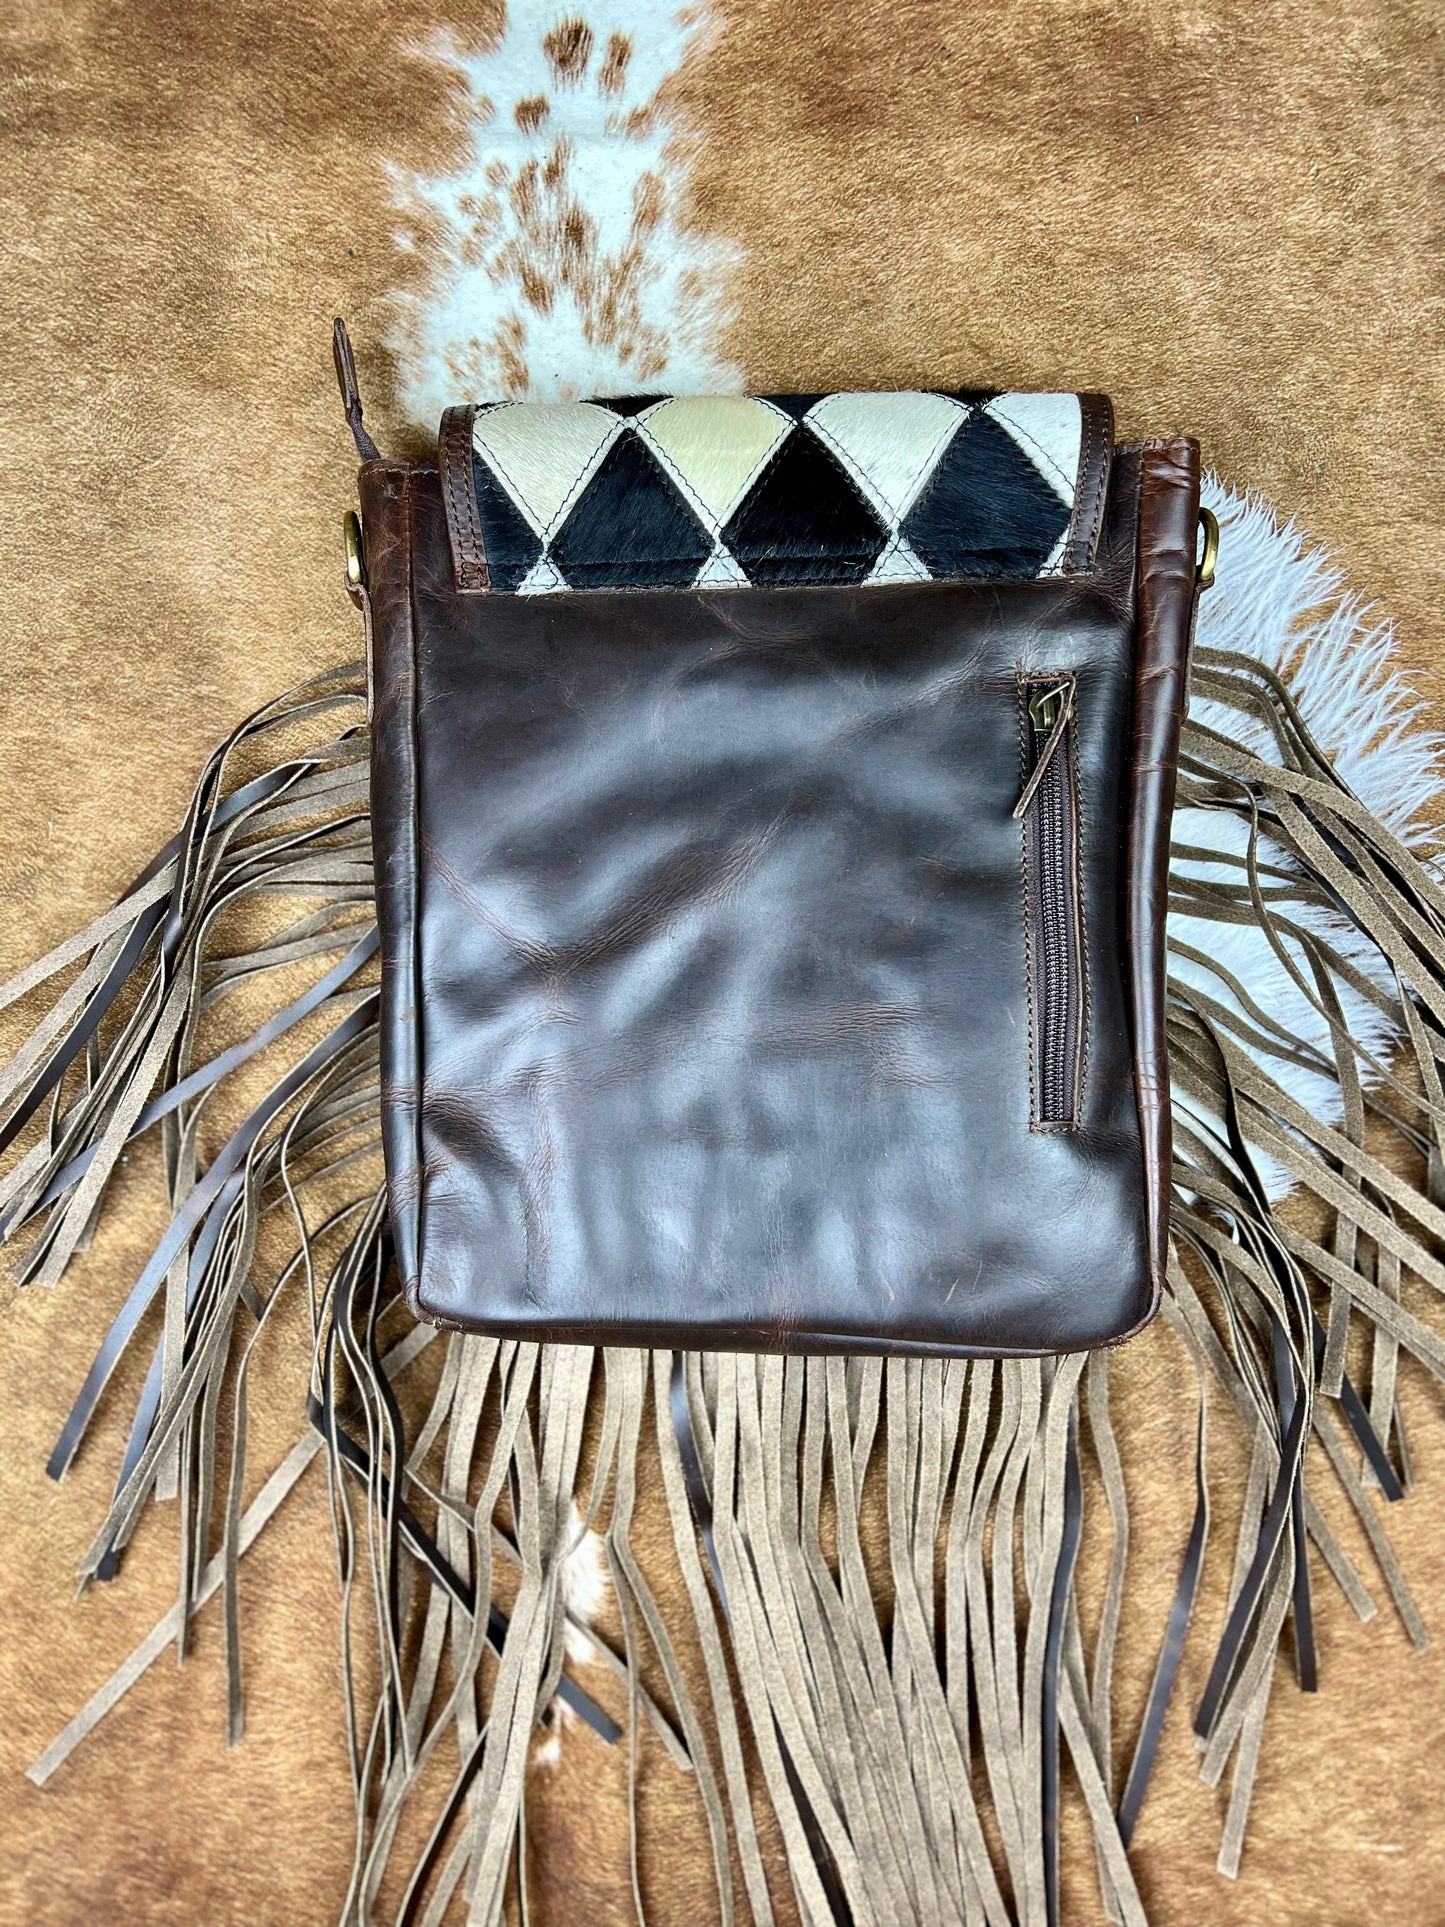 Klassy Cowgirl Leather Conceal Carry Crossbody Bag with diamond pattern hair on cowhide and fringe